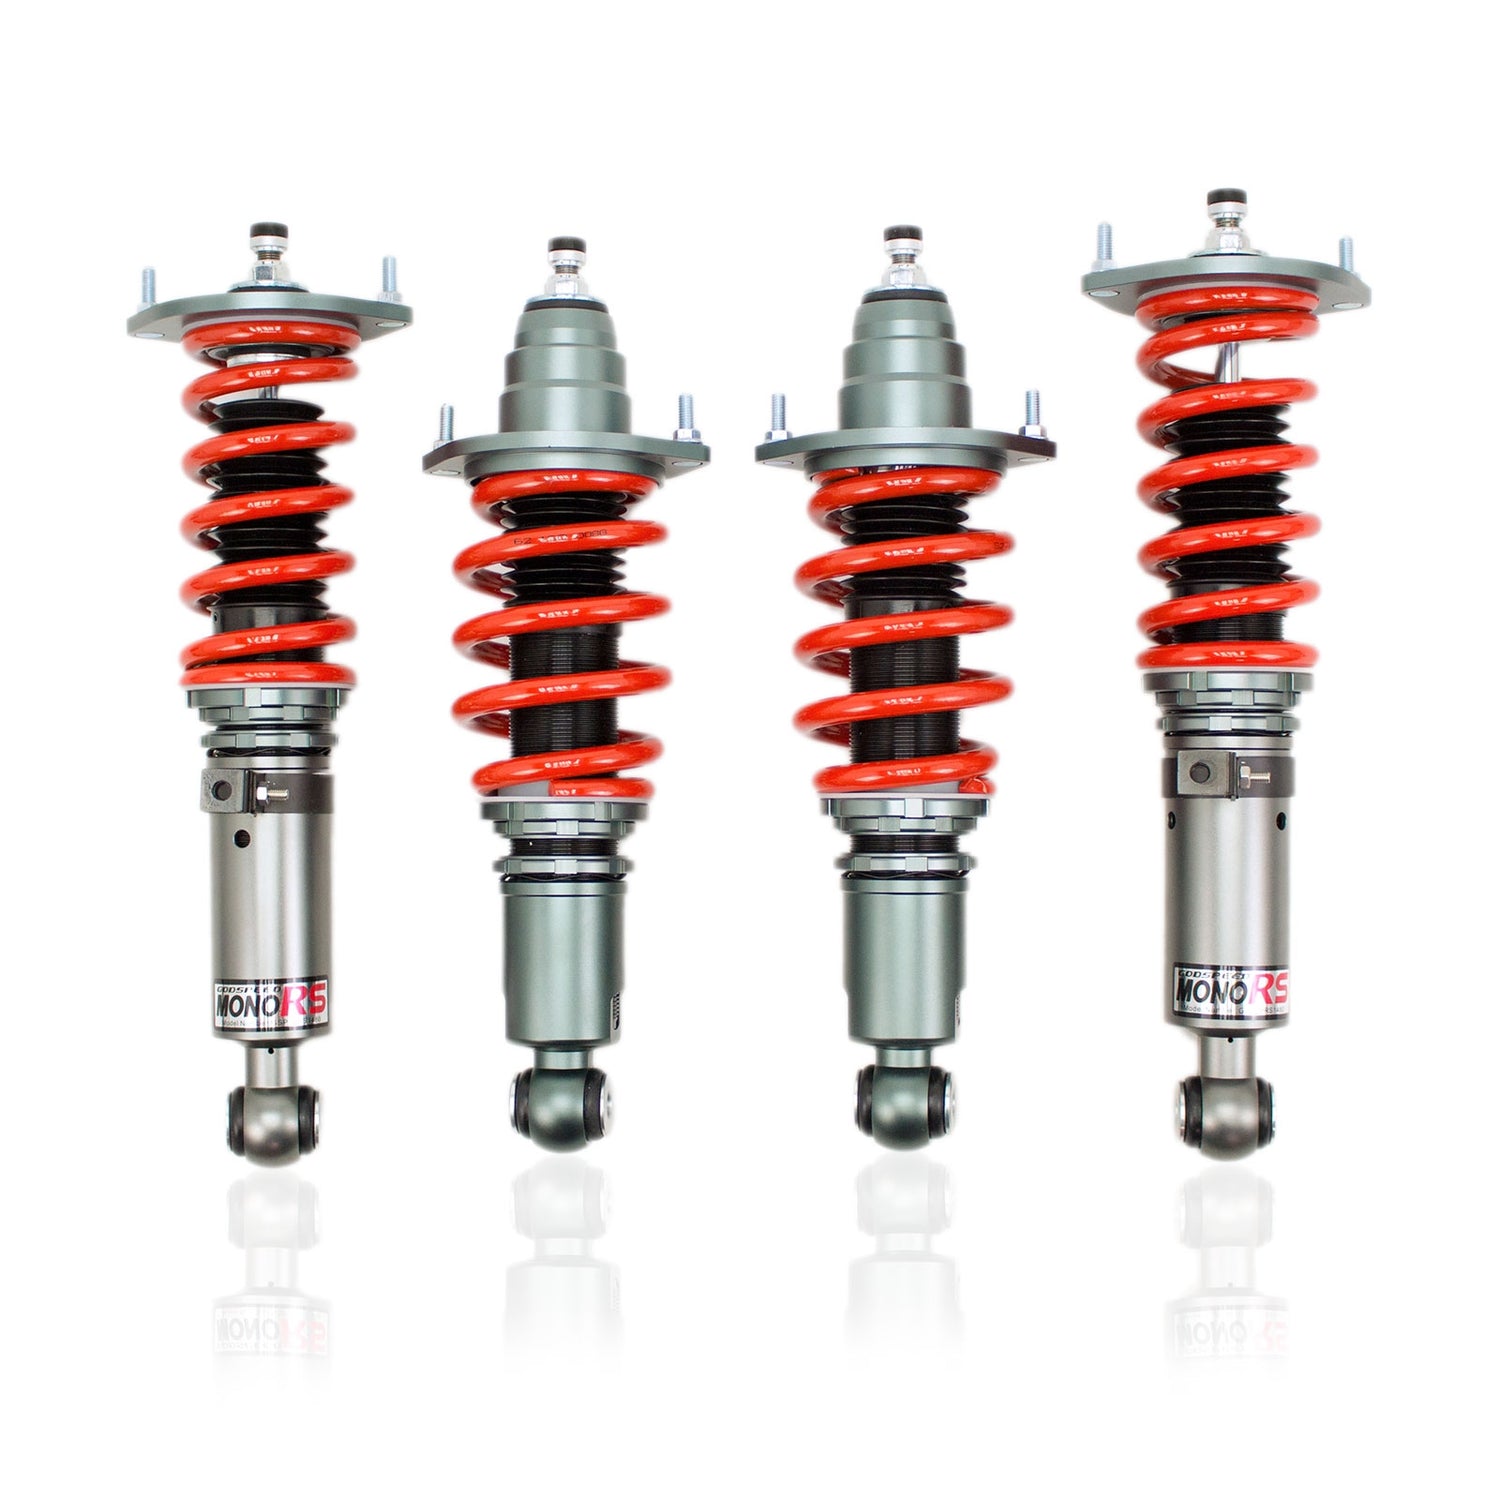 Godspeed MRS1480 MonoRS Coilover Lowering Kit, 32 Damping Adjustment, Ride Height Adjustable